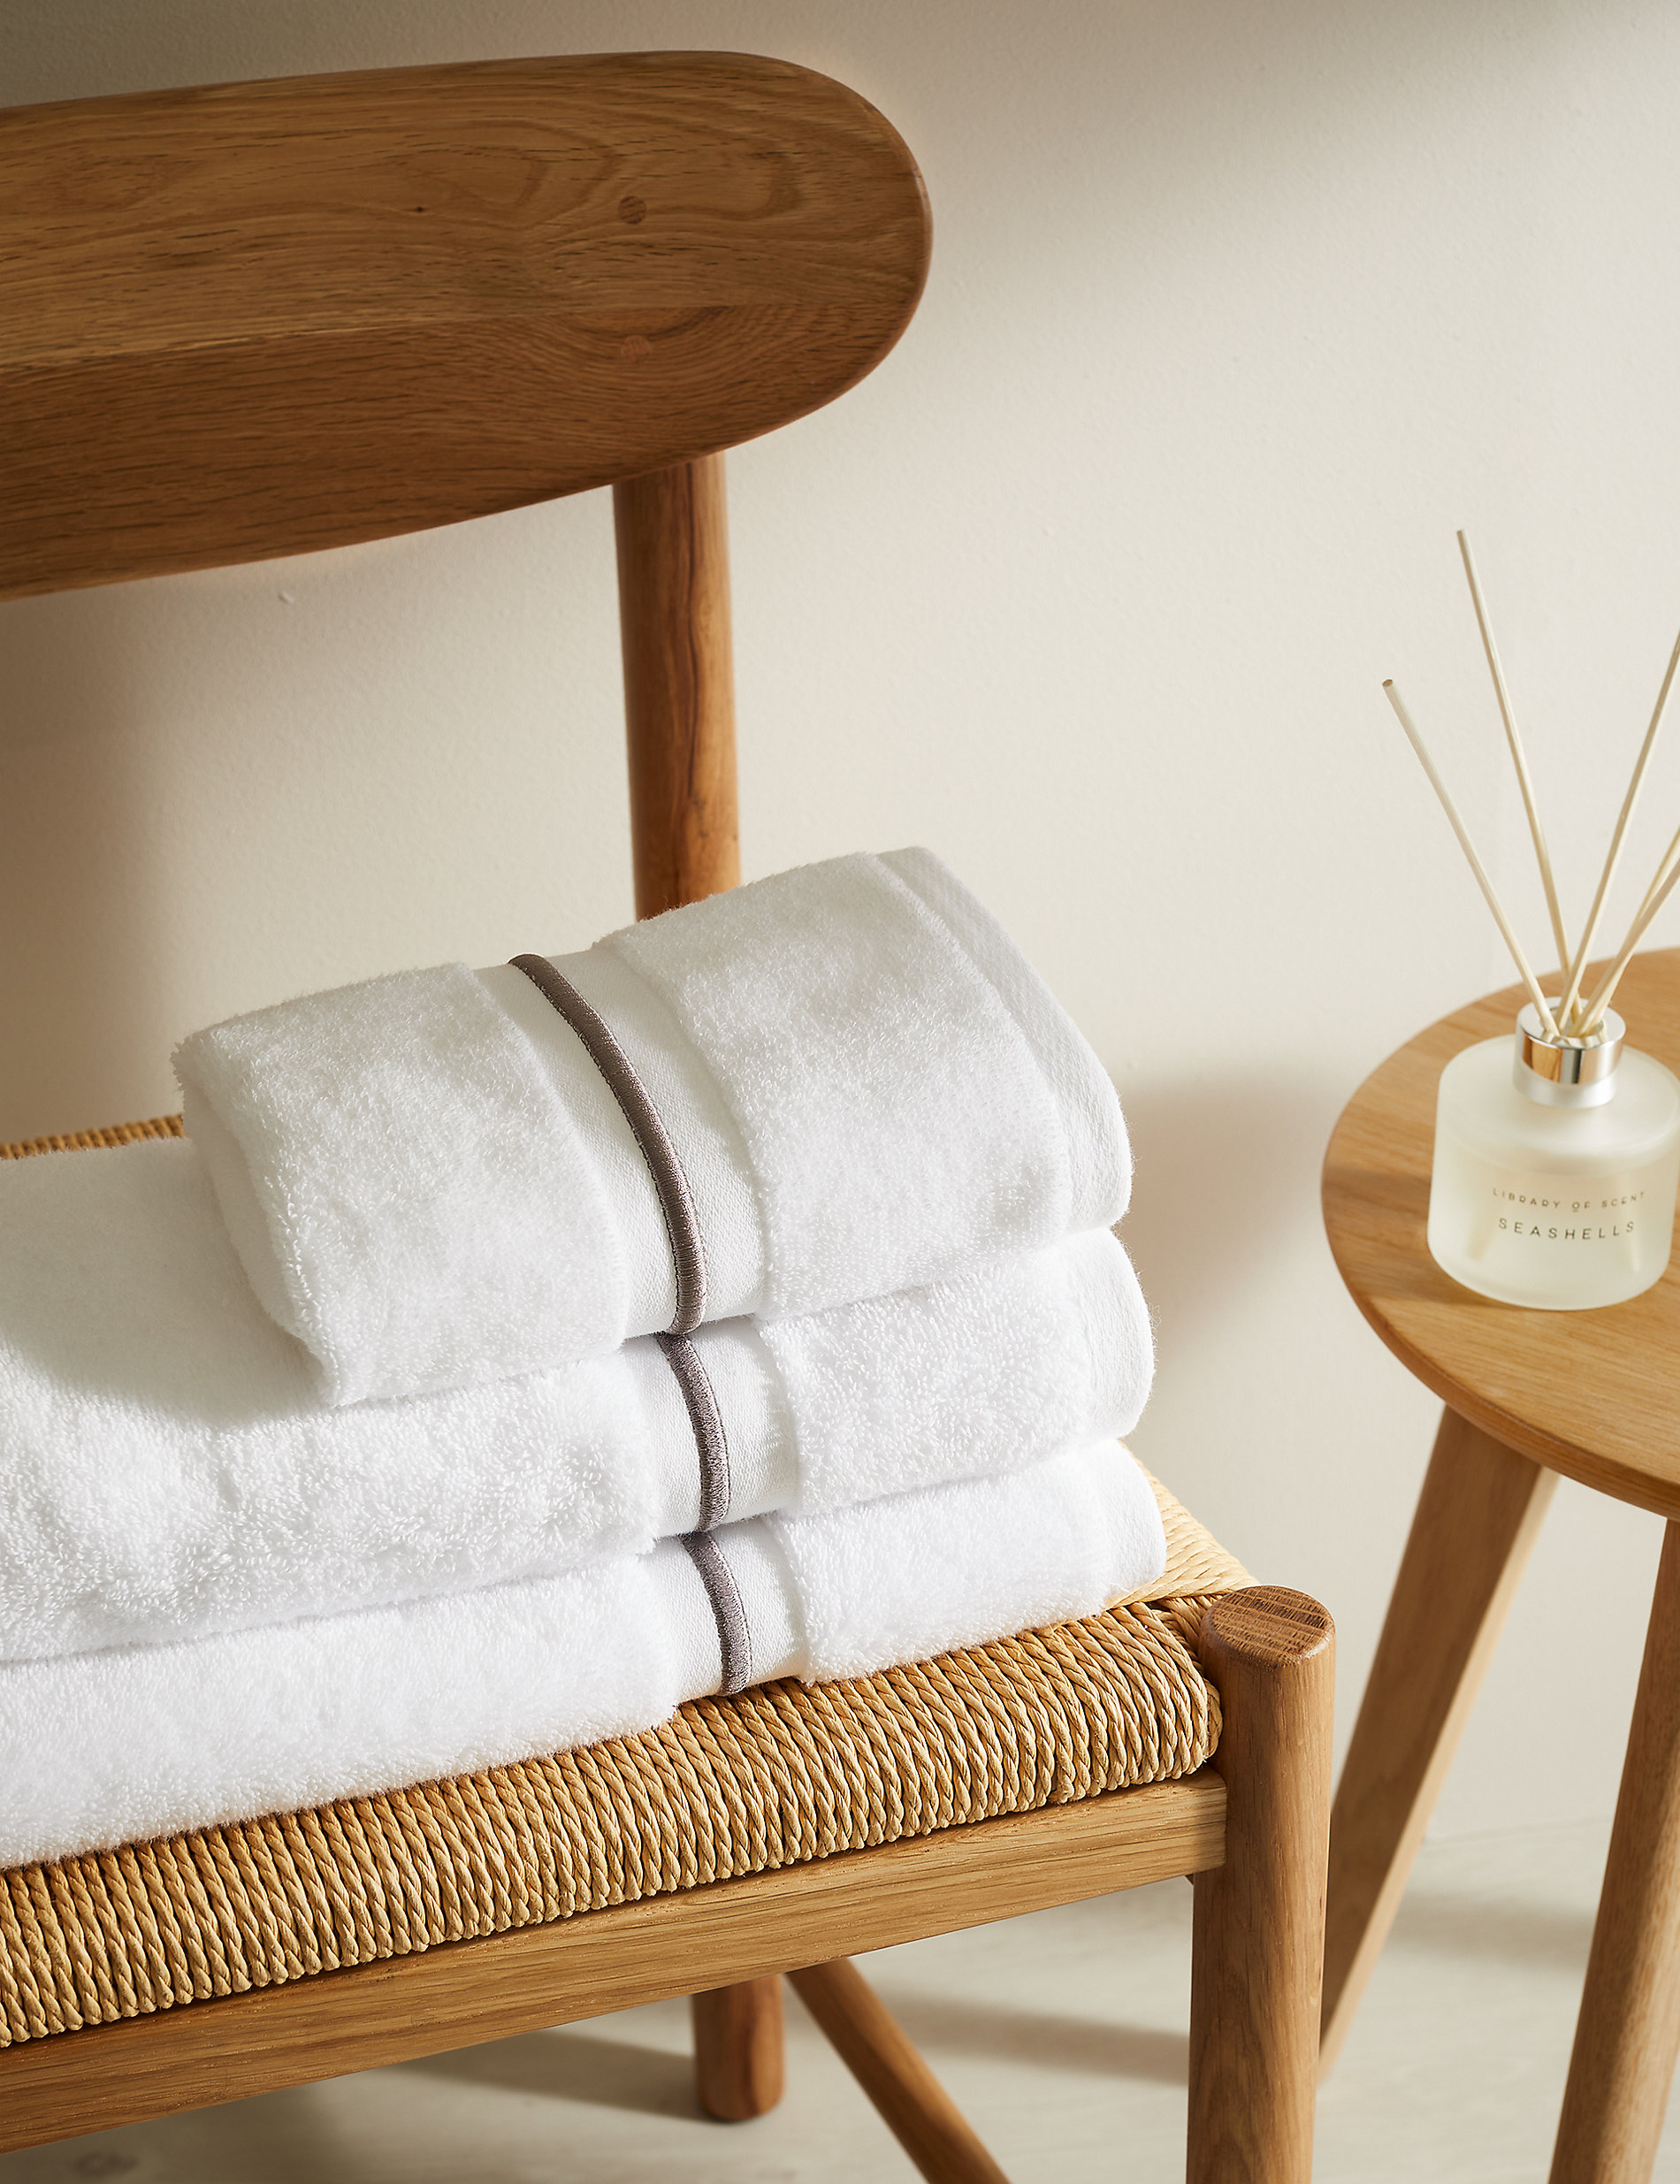 Pure Cotton Embroidered Towel